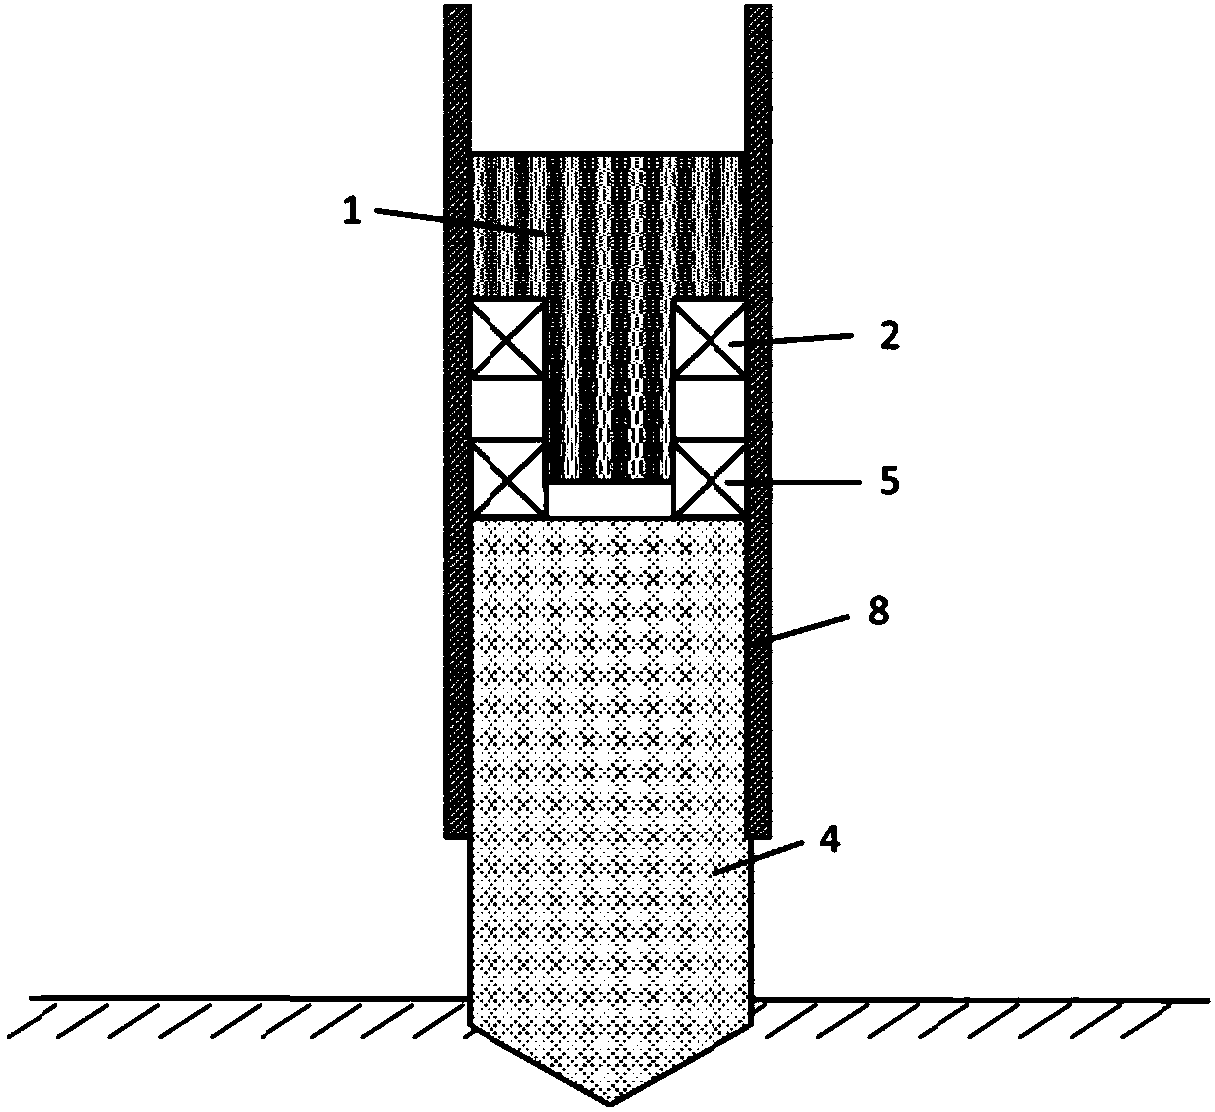 Piling device and method